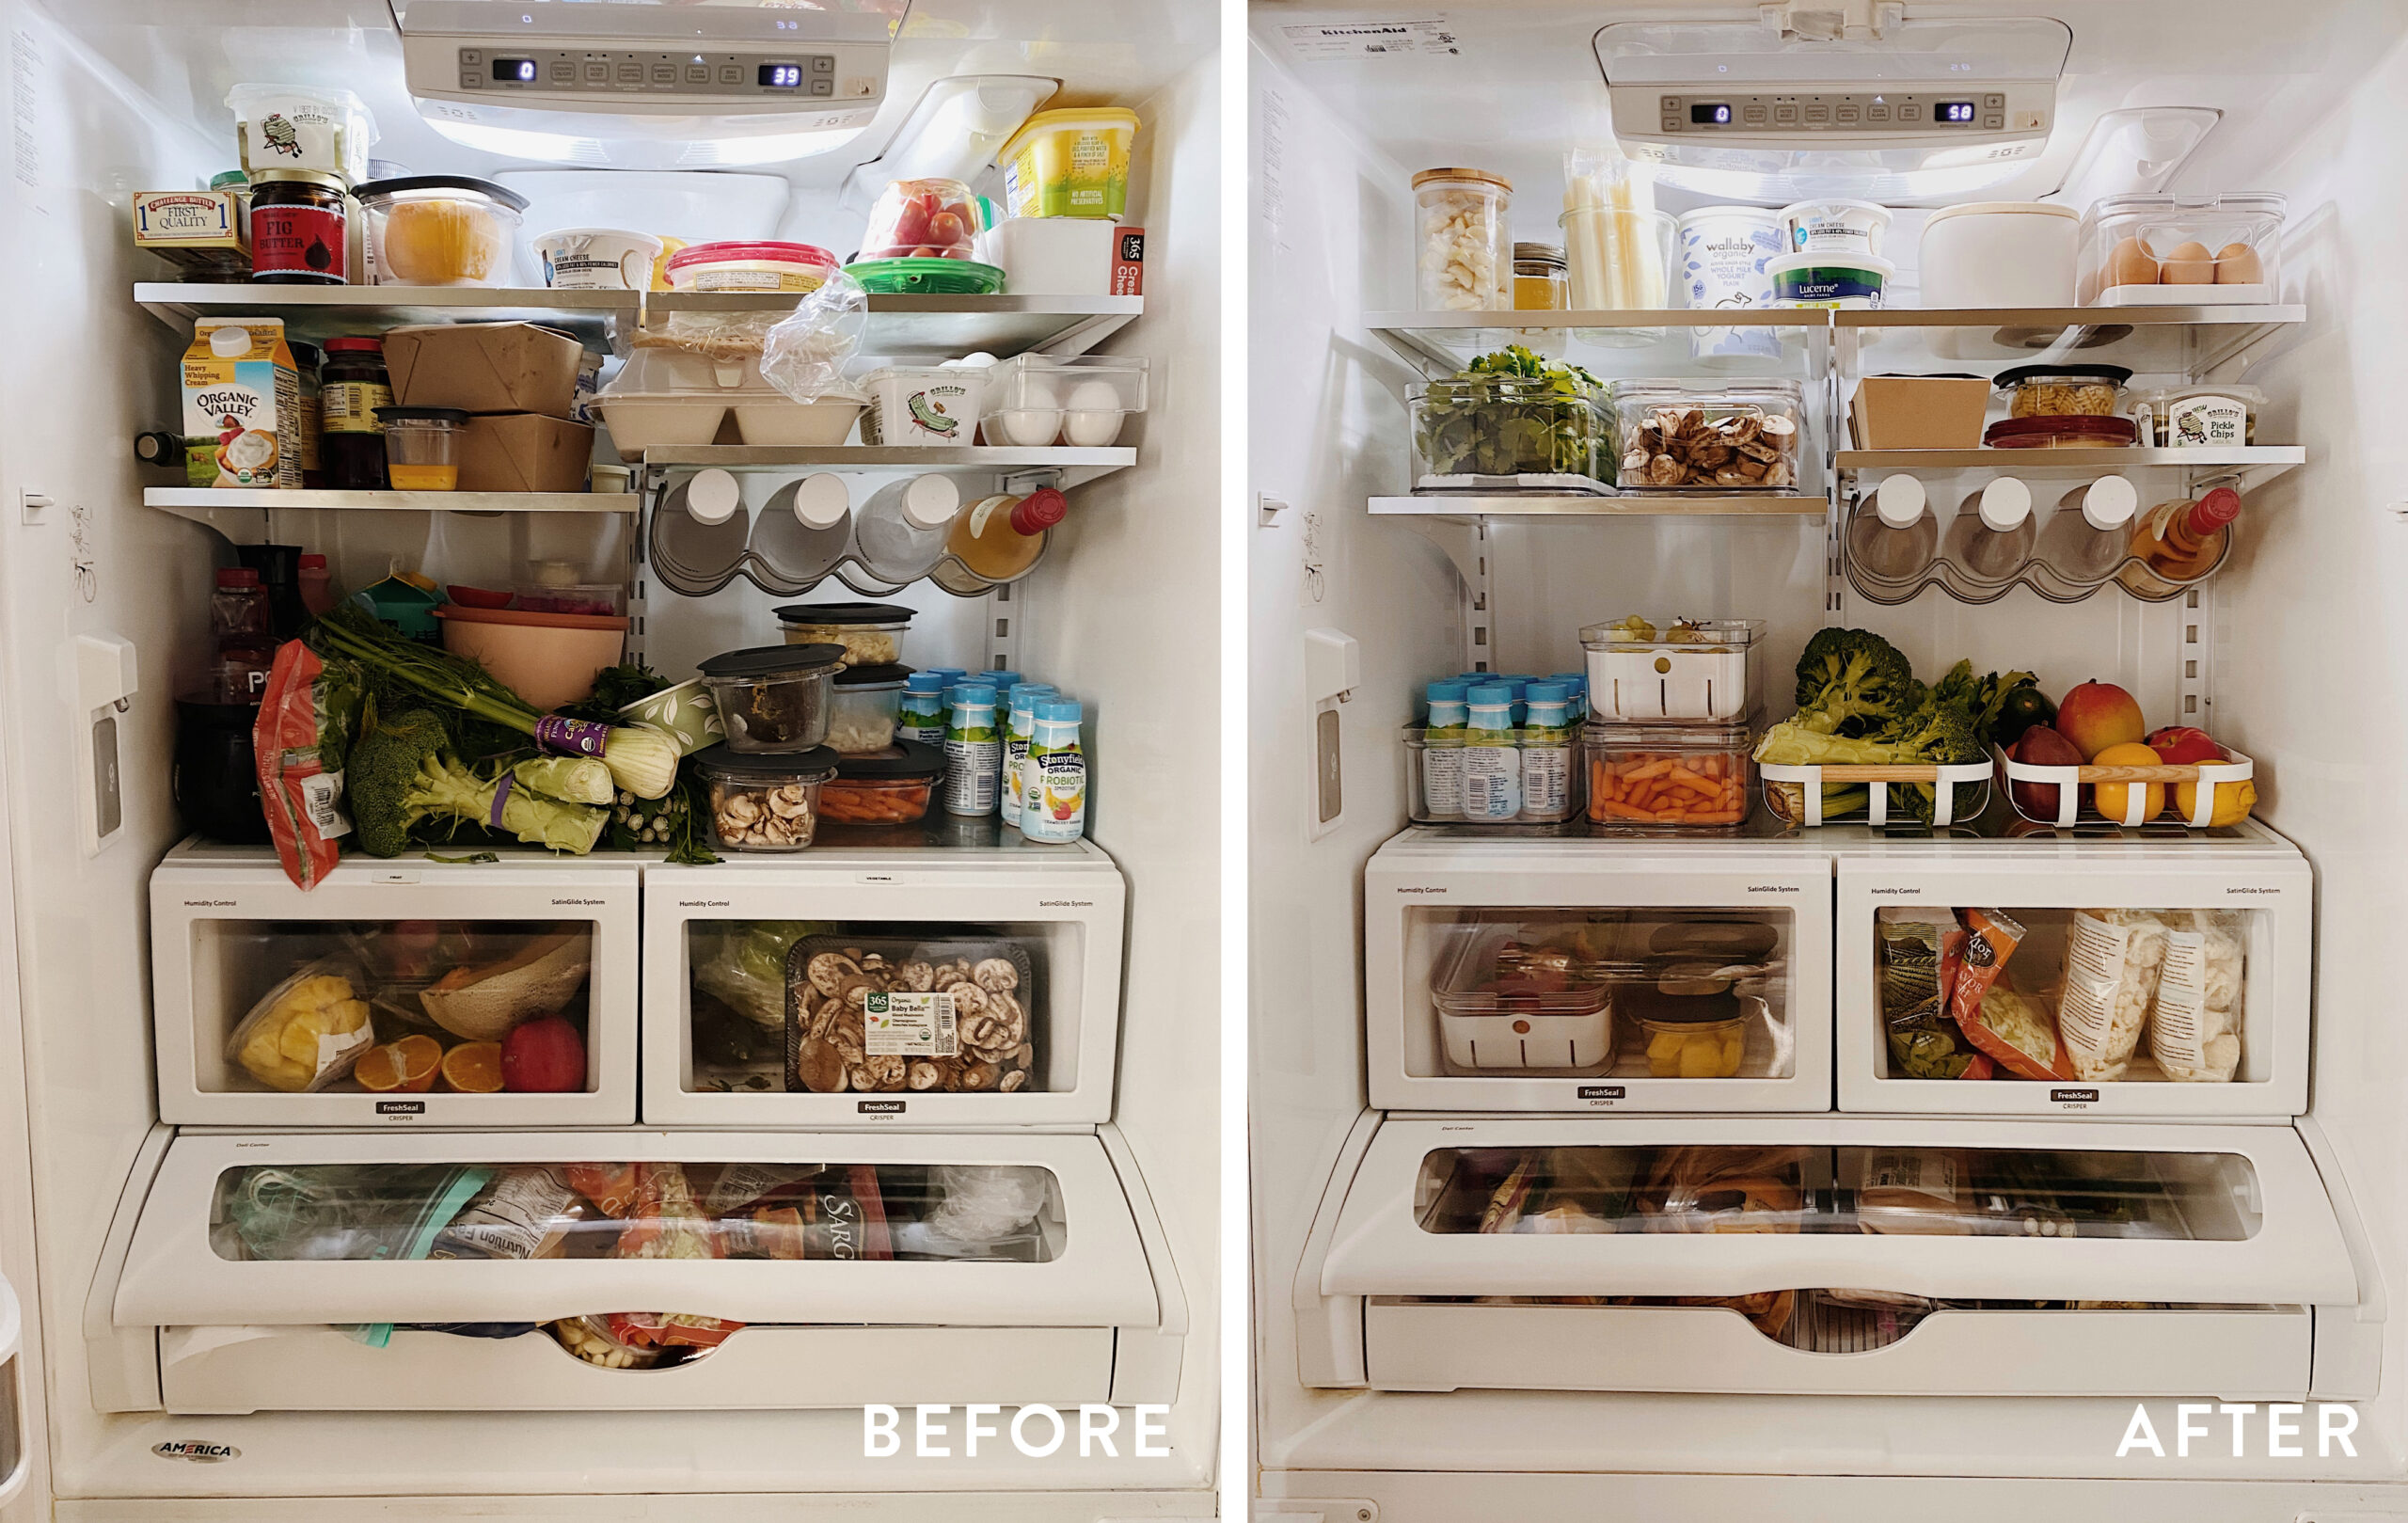 What You Should Know Before Deep Cleaning & Organizing Your Fridge